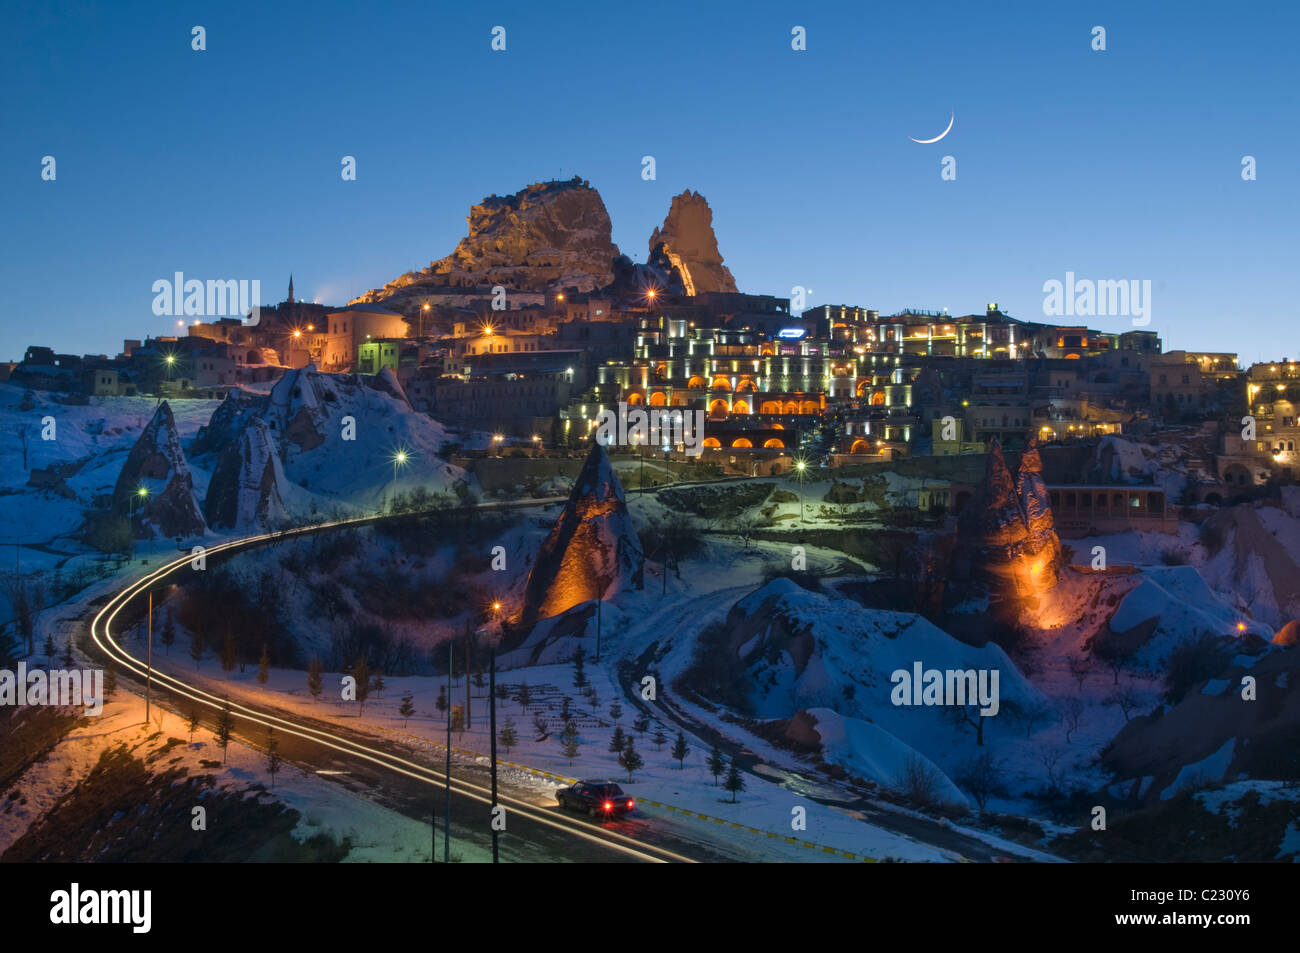 Uçhisar Hill and Castle in the evening in Cappadocia,Central Anatolia of Turkey Stock Photo